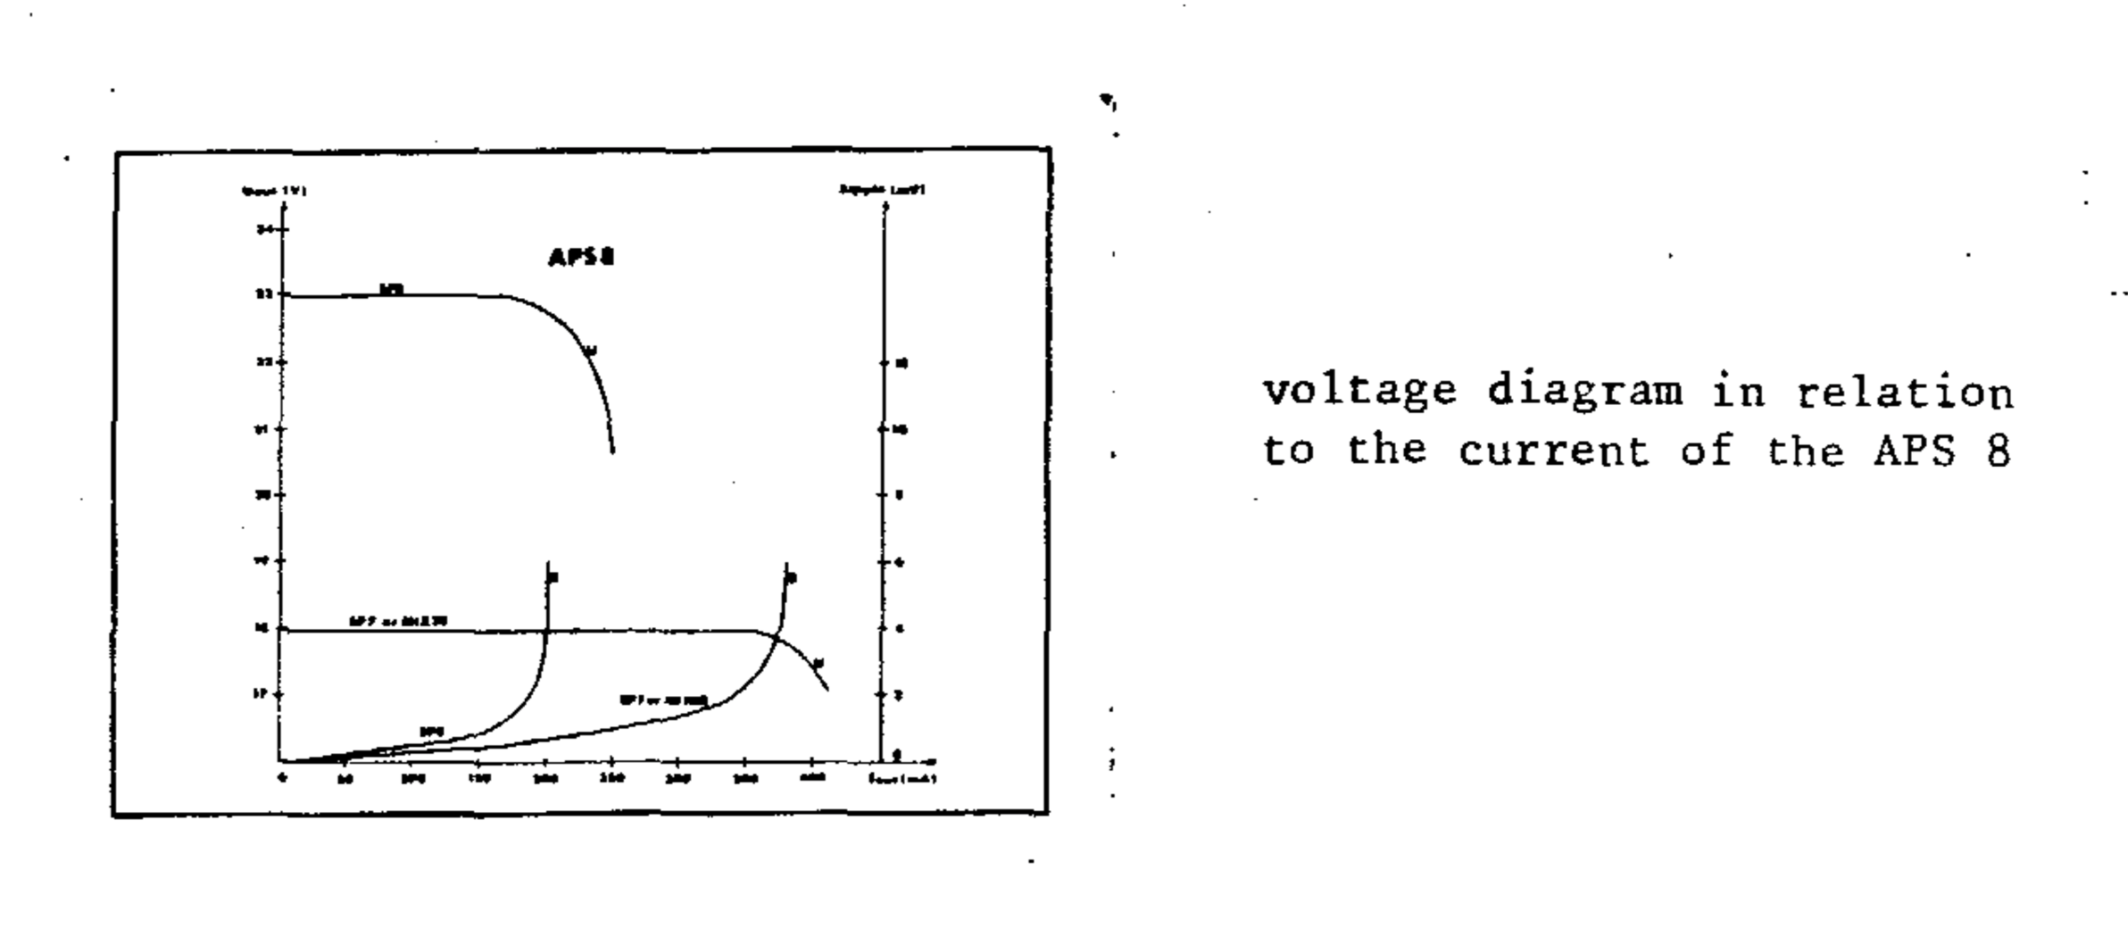 Voltage diagram in relation to the current of the APS 8